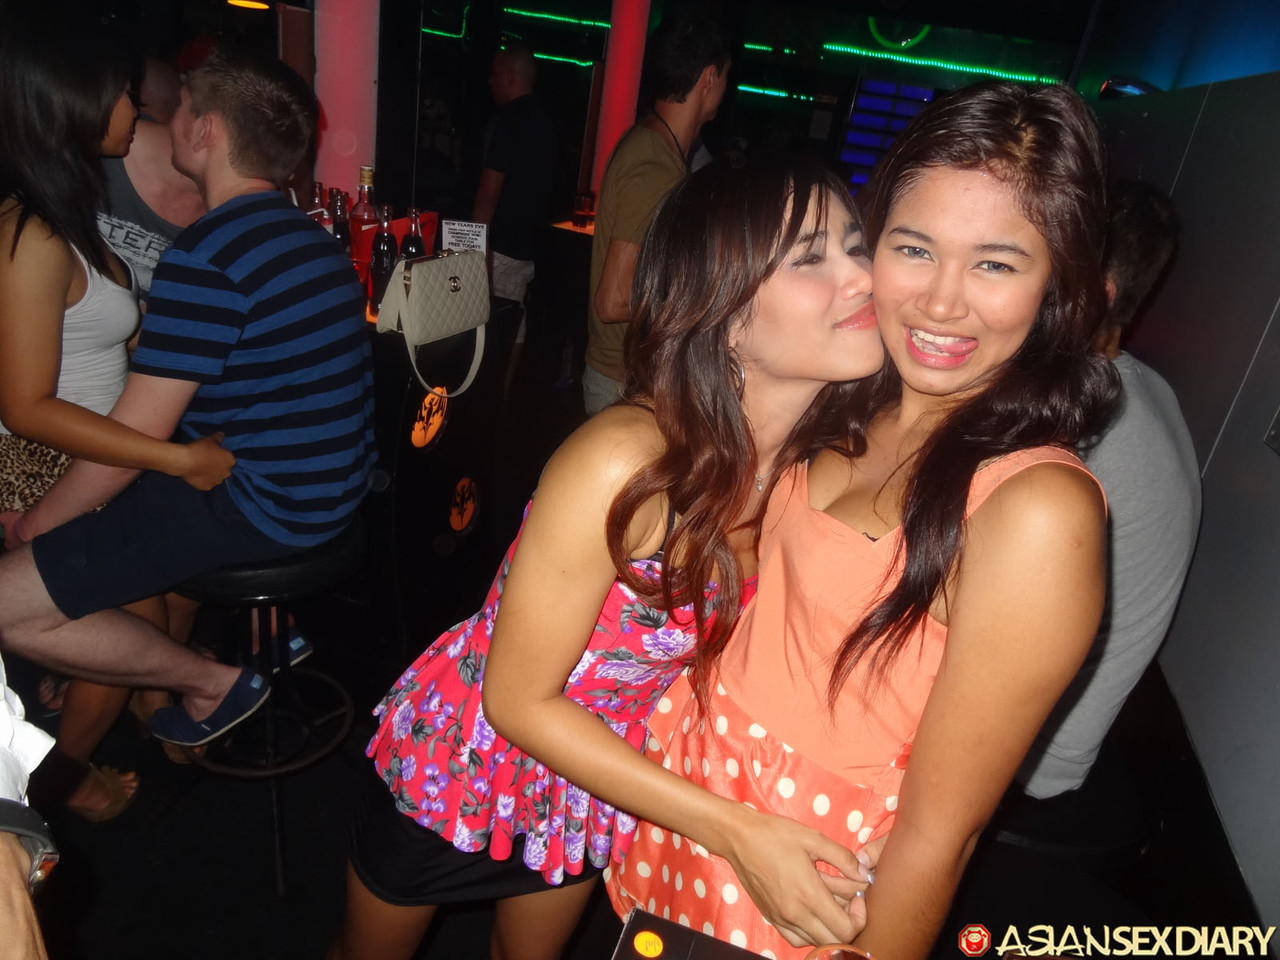 Lesbian Ayon Her Gf Tease In Sexy Outfits At The Club While Naked At Home